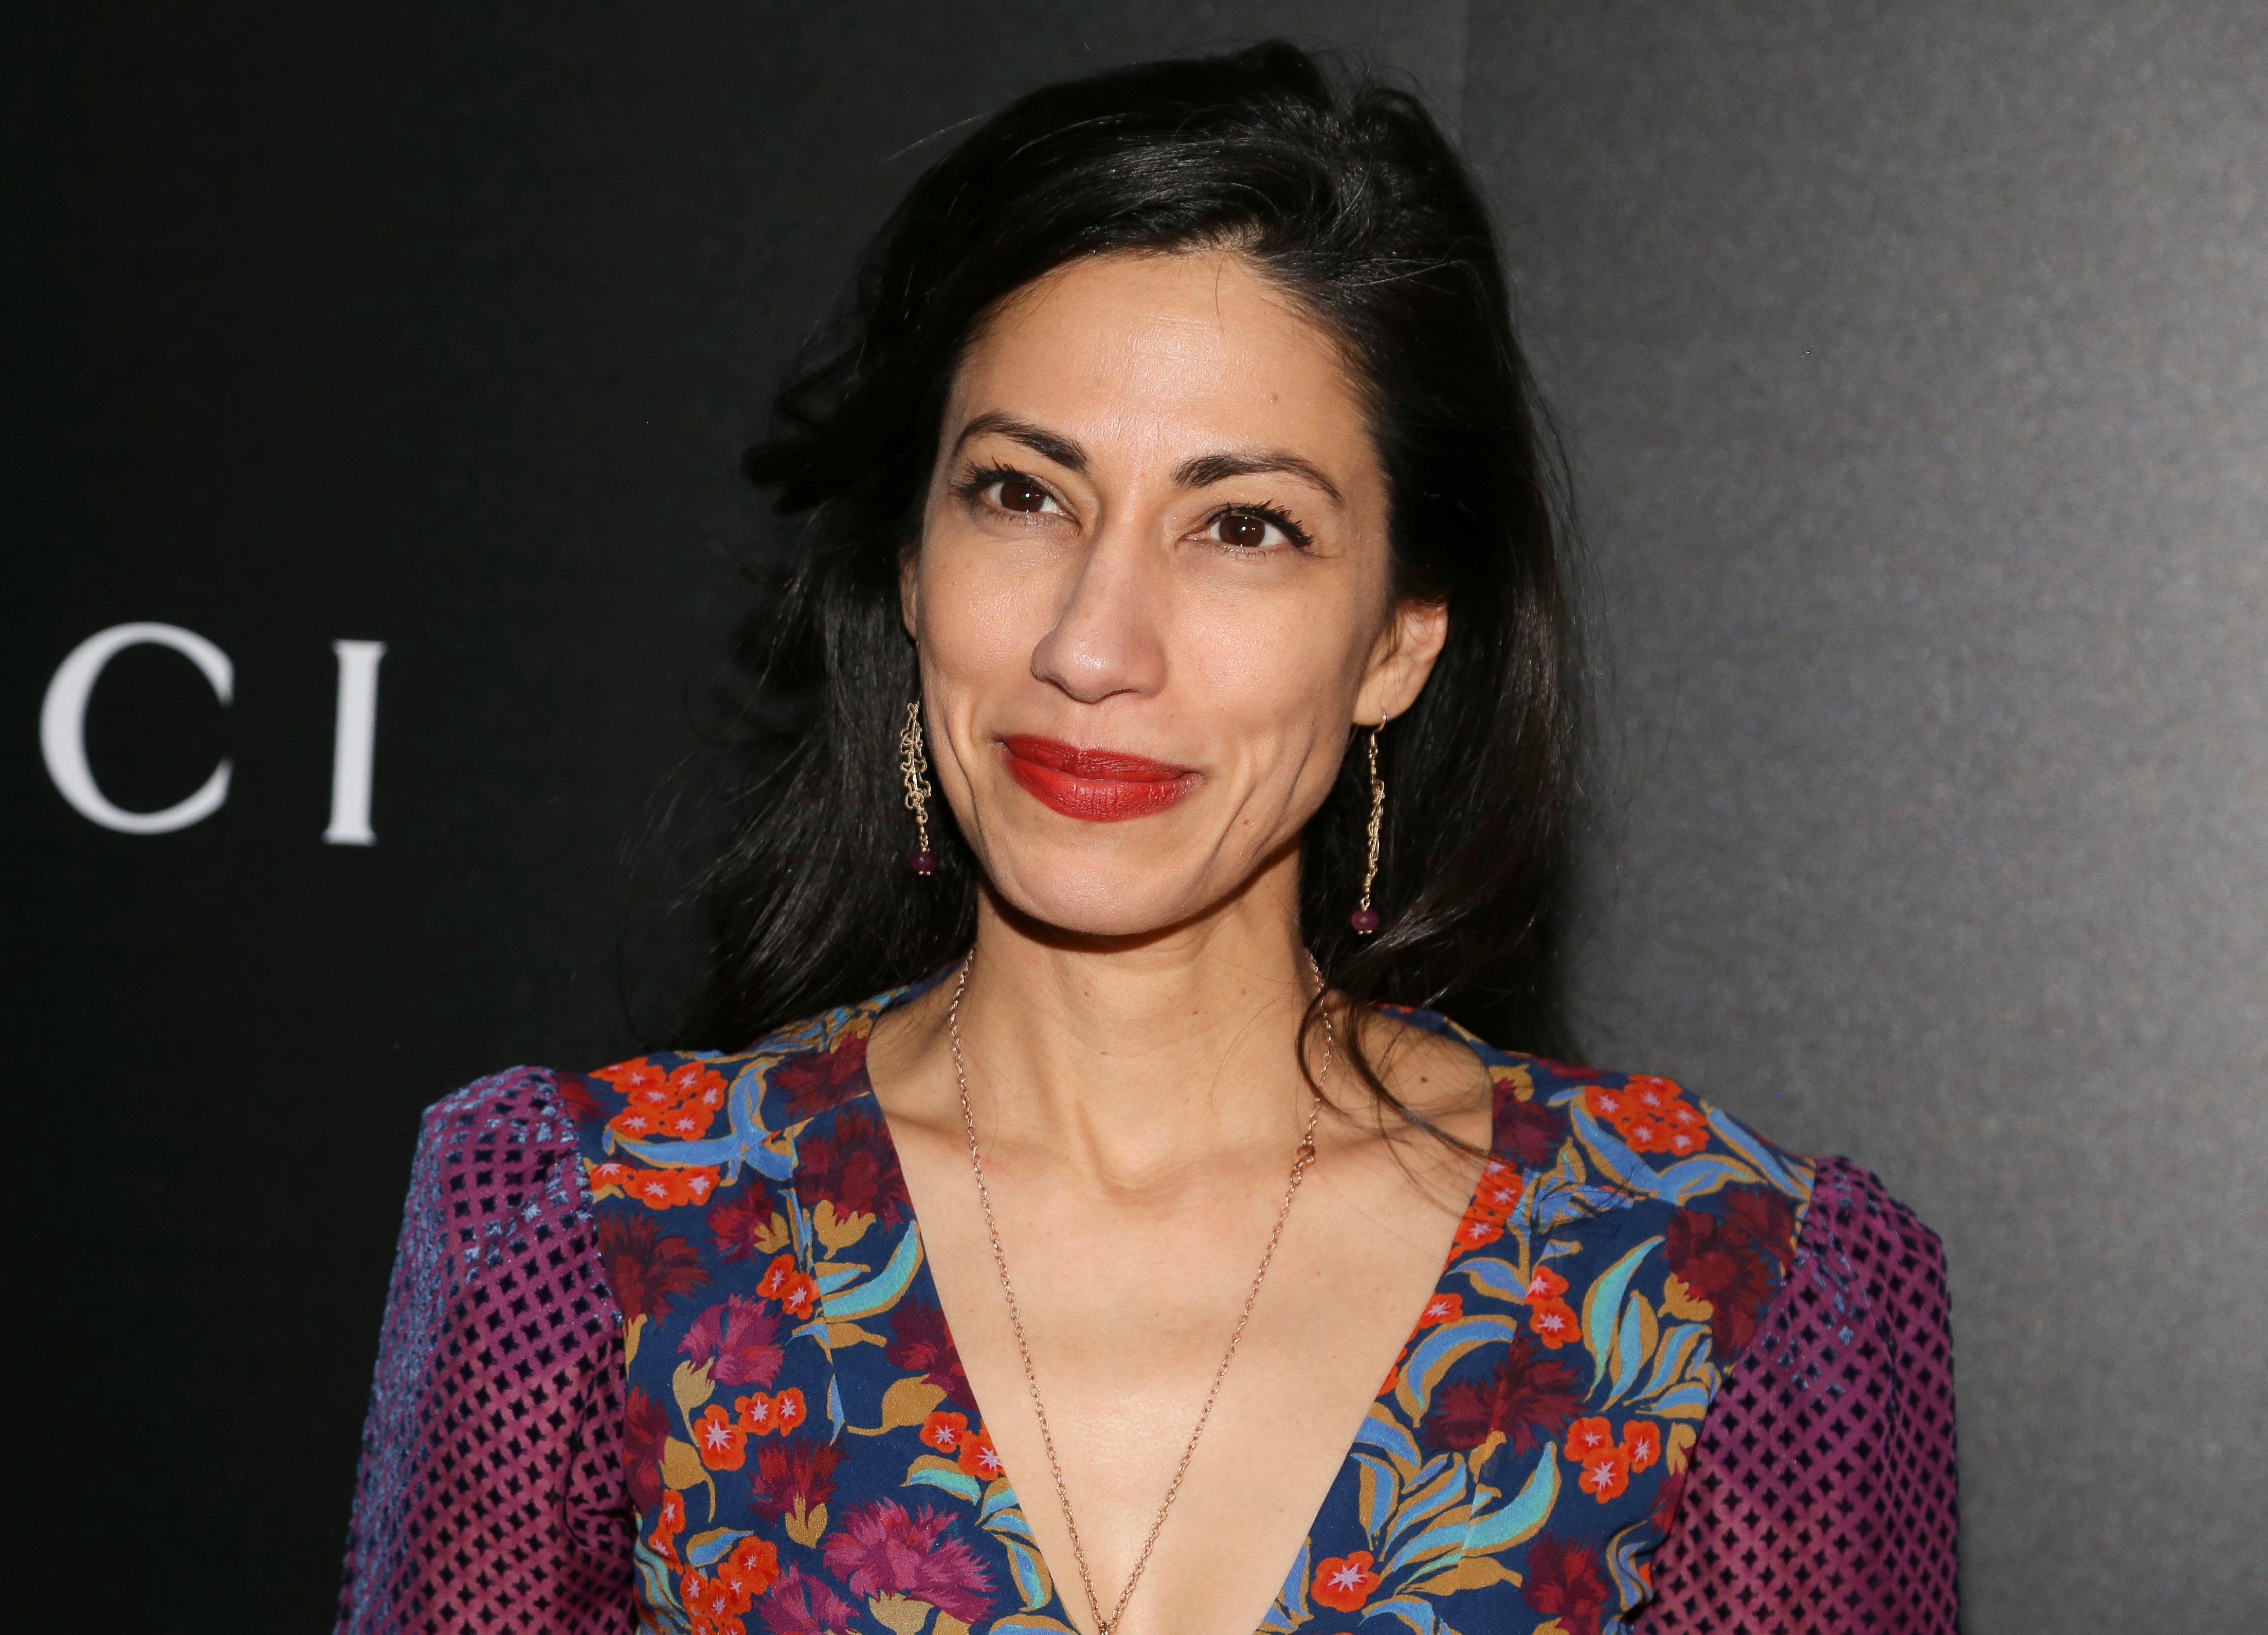 Huma Abedin Net Worth - A Resilient And Influential Political Staffer